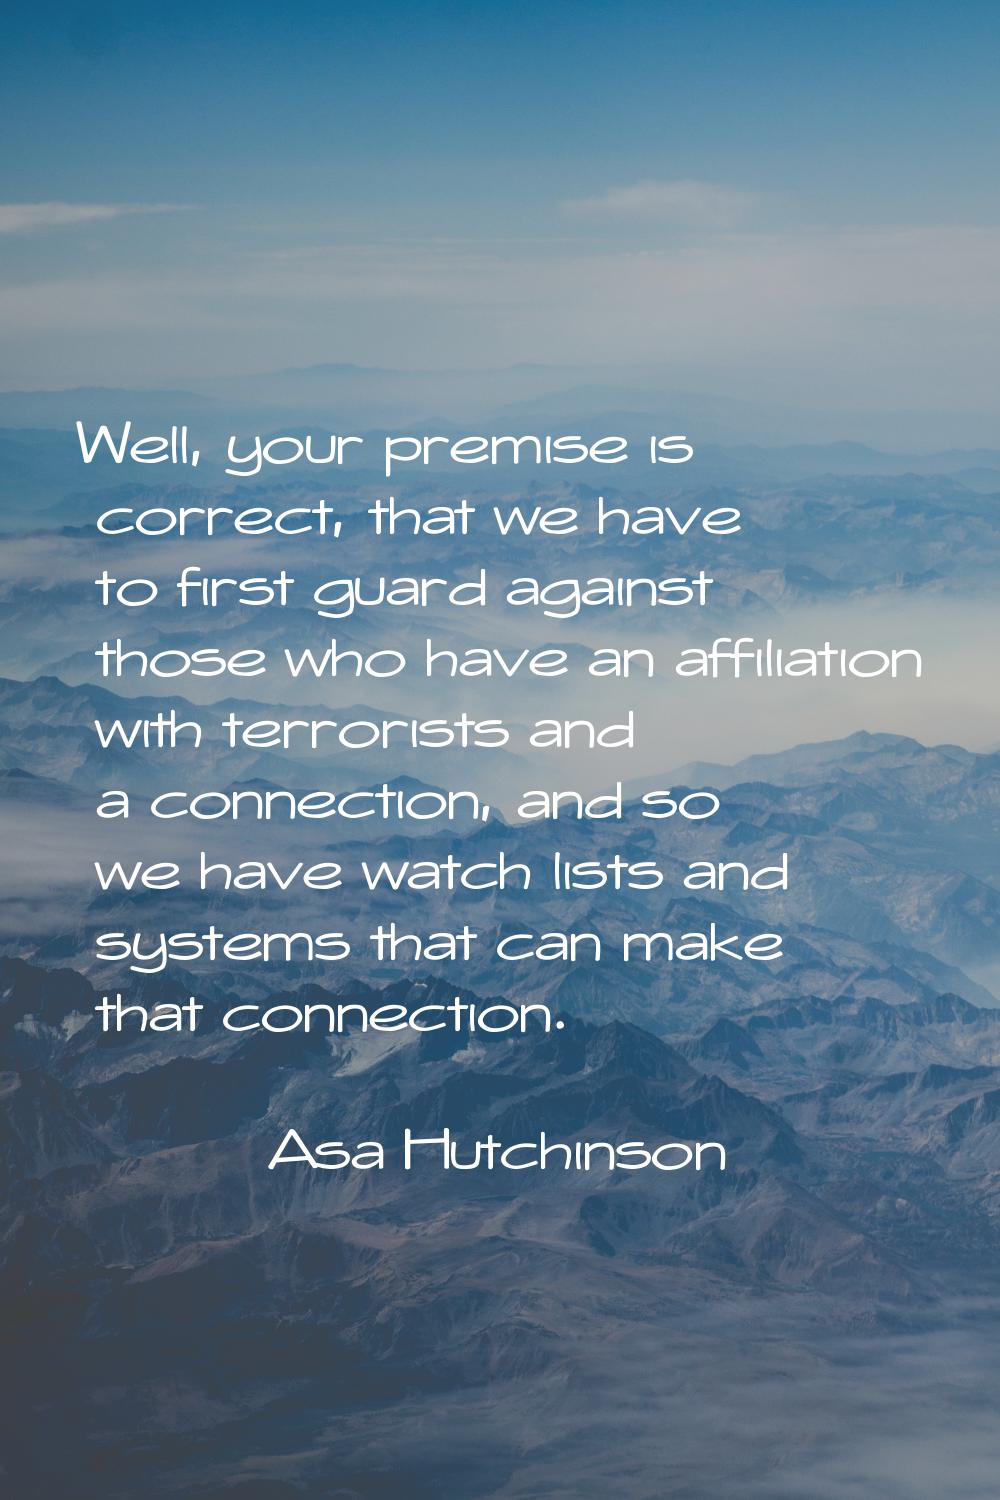 Well, your premise is correct, that we have to first guard against those who have an affiliation wi